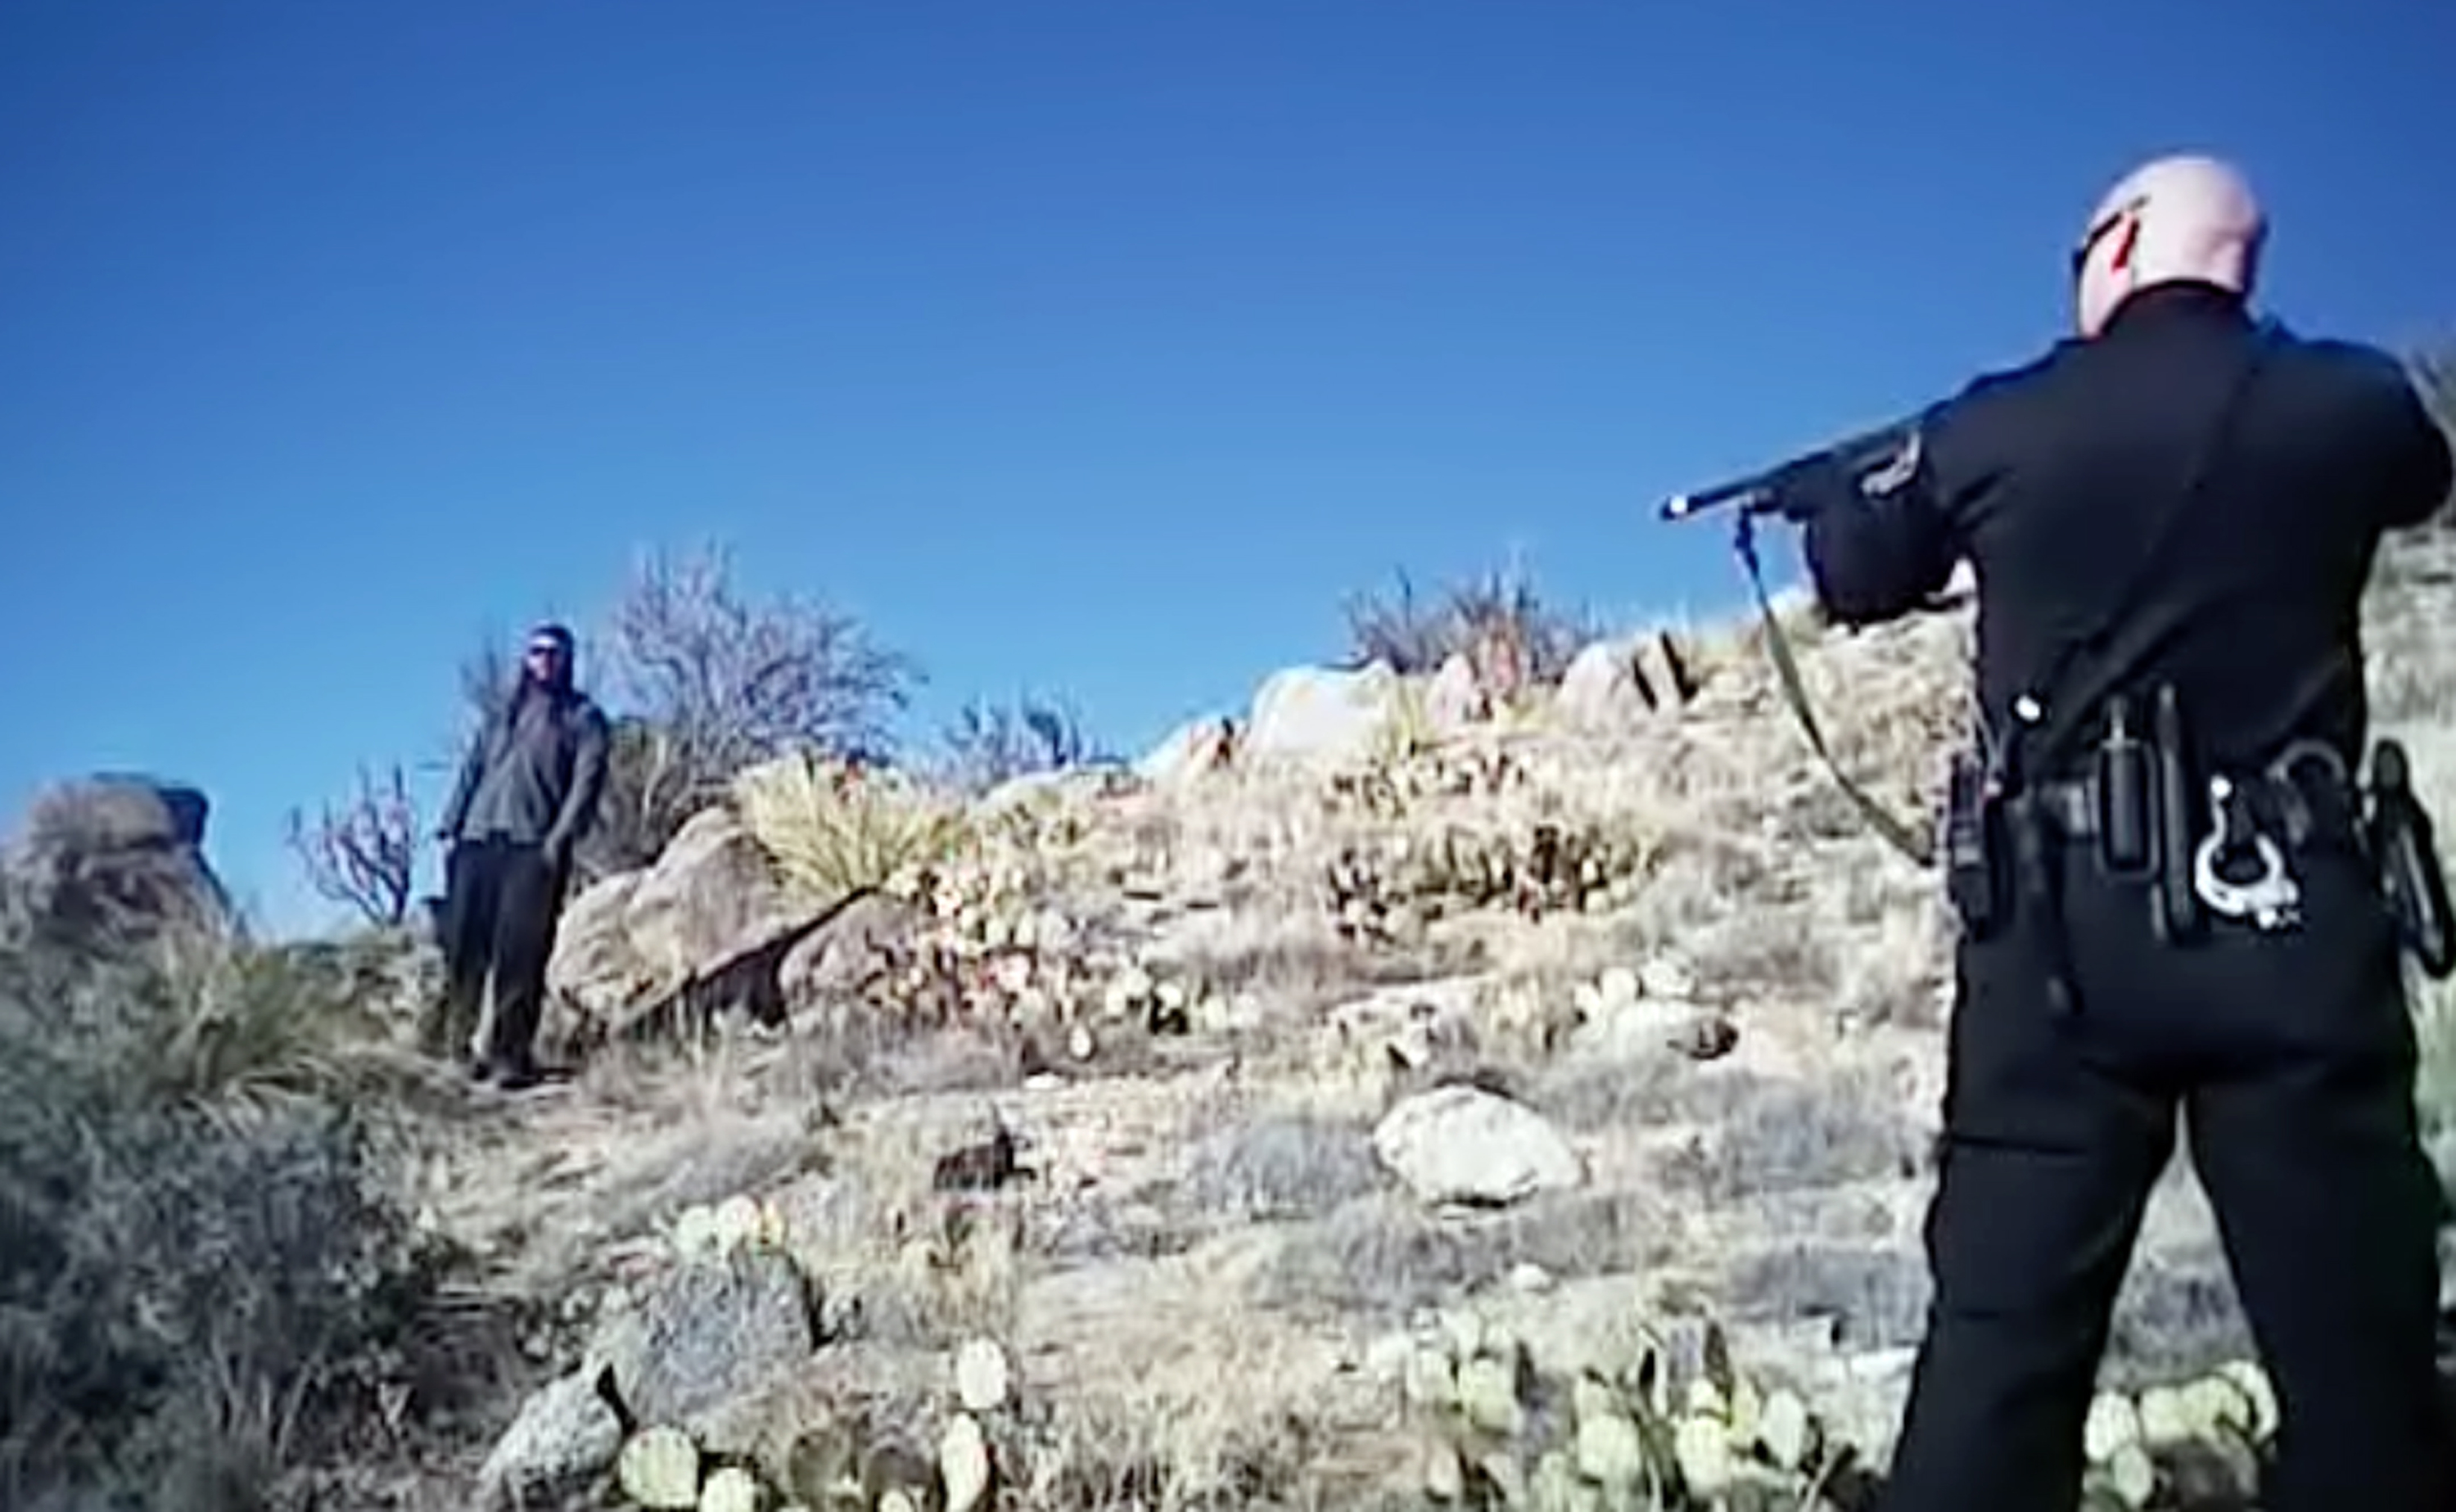 In this photo taken from a video on March 16, 2014 James Boyd is shown during a standoff with officers in the Sandia foothills in Albuquerque, N.M., before police fatally shot him. (AP)